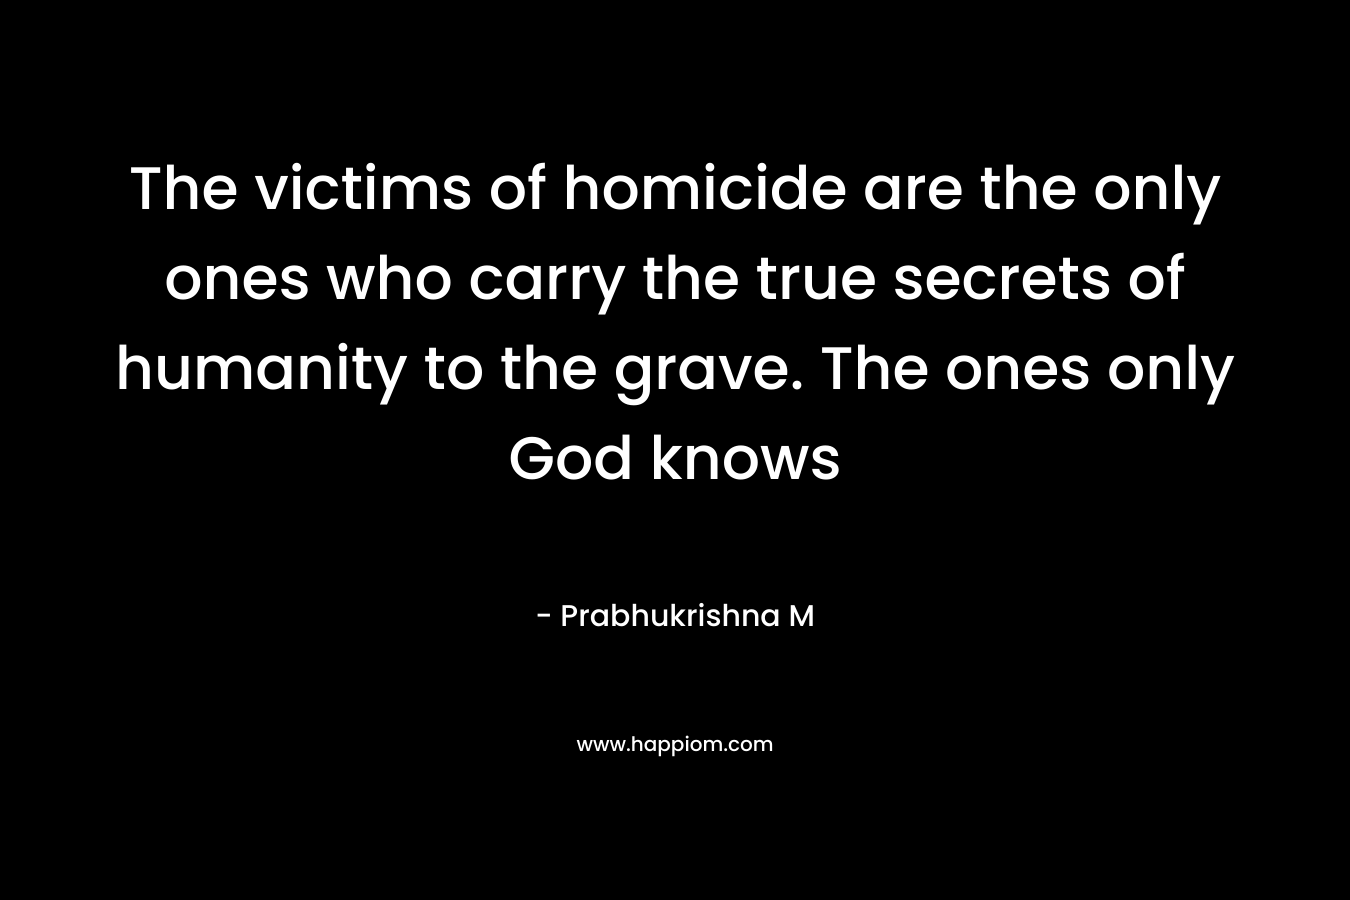 The victims of homicide are the only ones who carry the true secrets of humanity to the grave. The ones only God knows – Prabhukrishna M